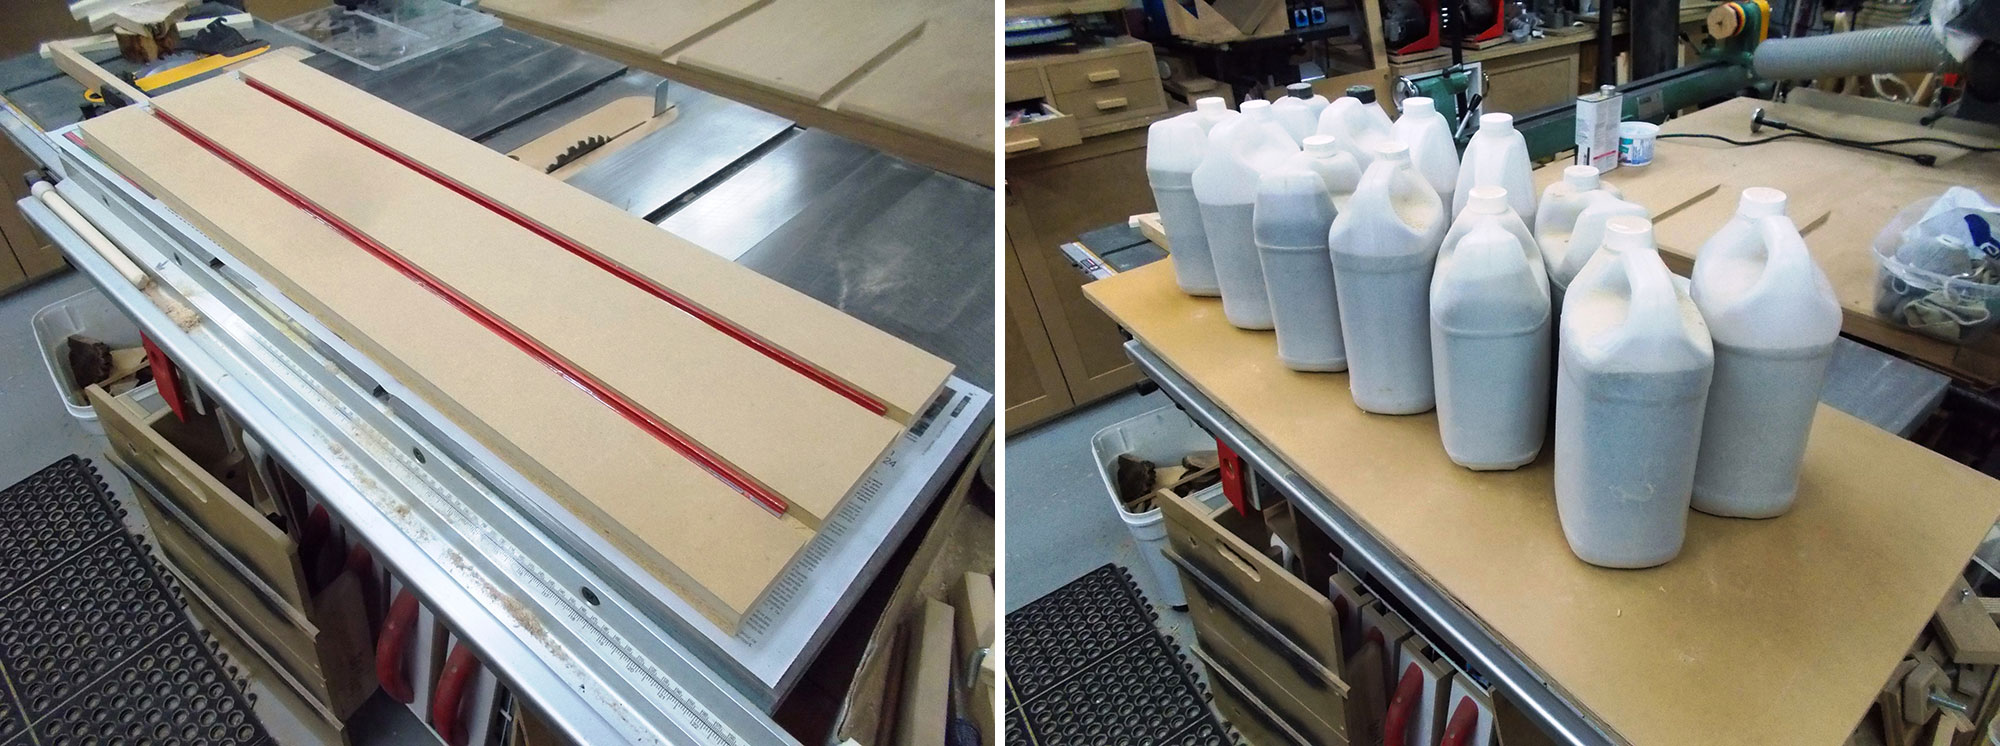 Image left: Man-made board on table saw. Image right: Twelve one-gallon jugs of sand on man-made board.